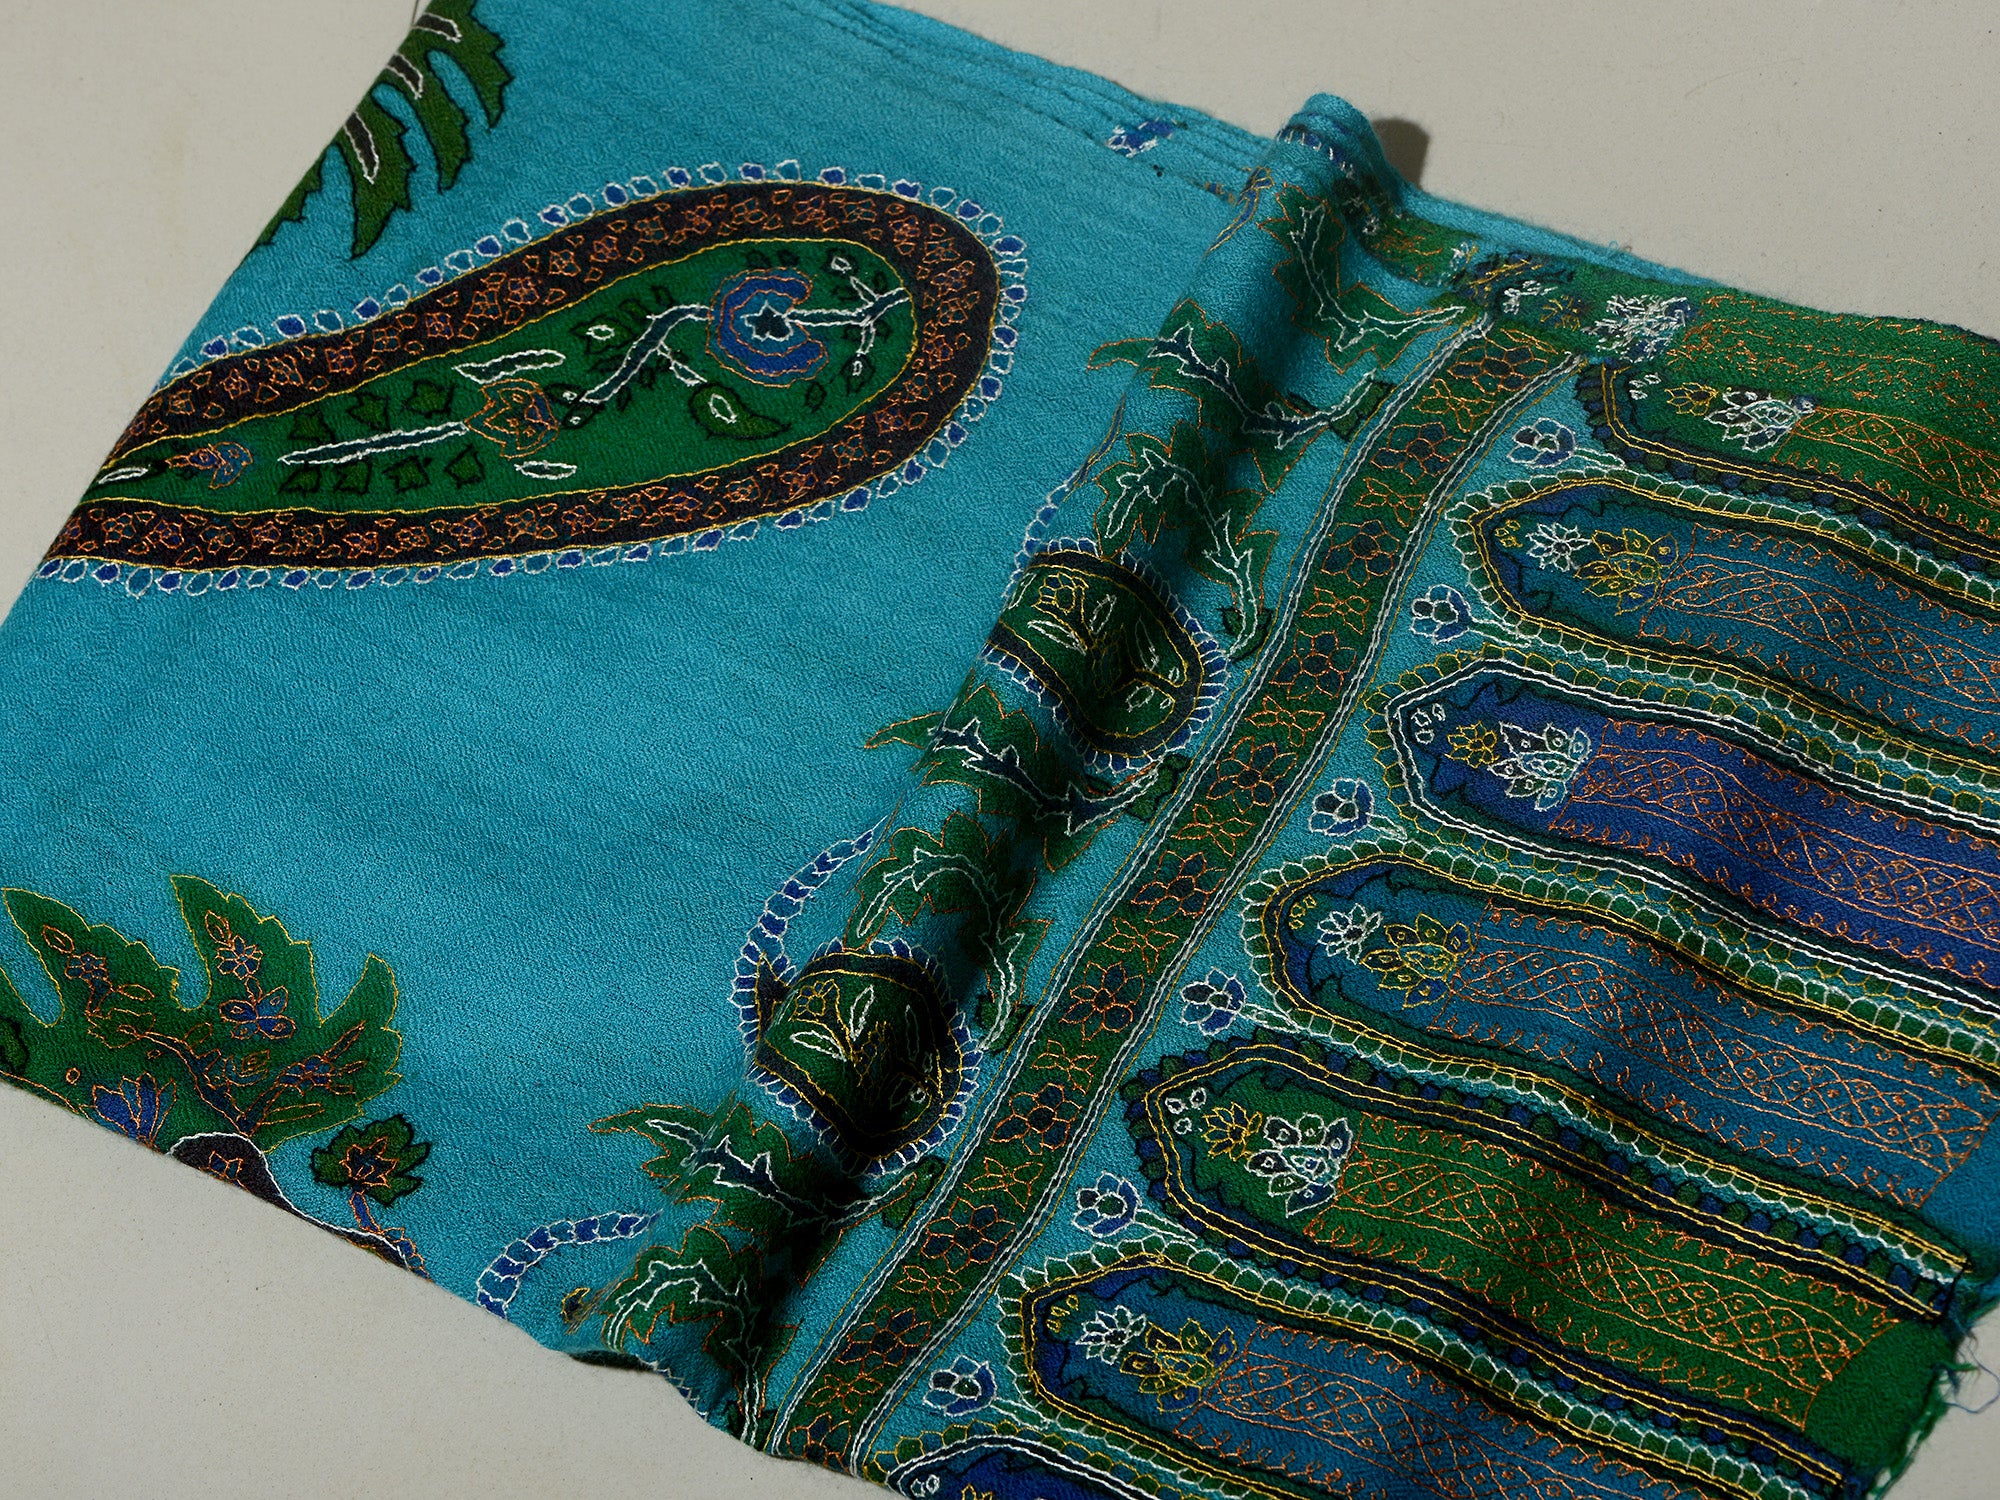 PAISLEY FLORAL Exquisite Kalamkari Kani Stole with Hand embroidery - Blue